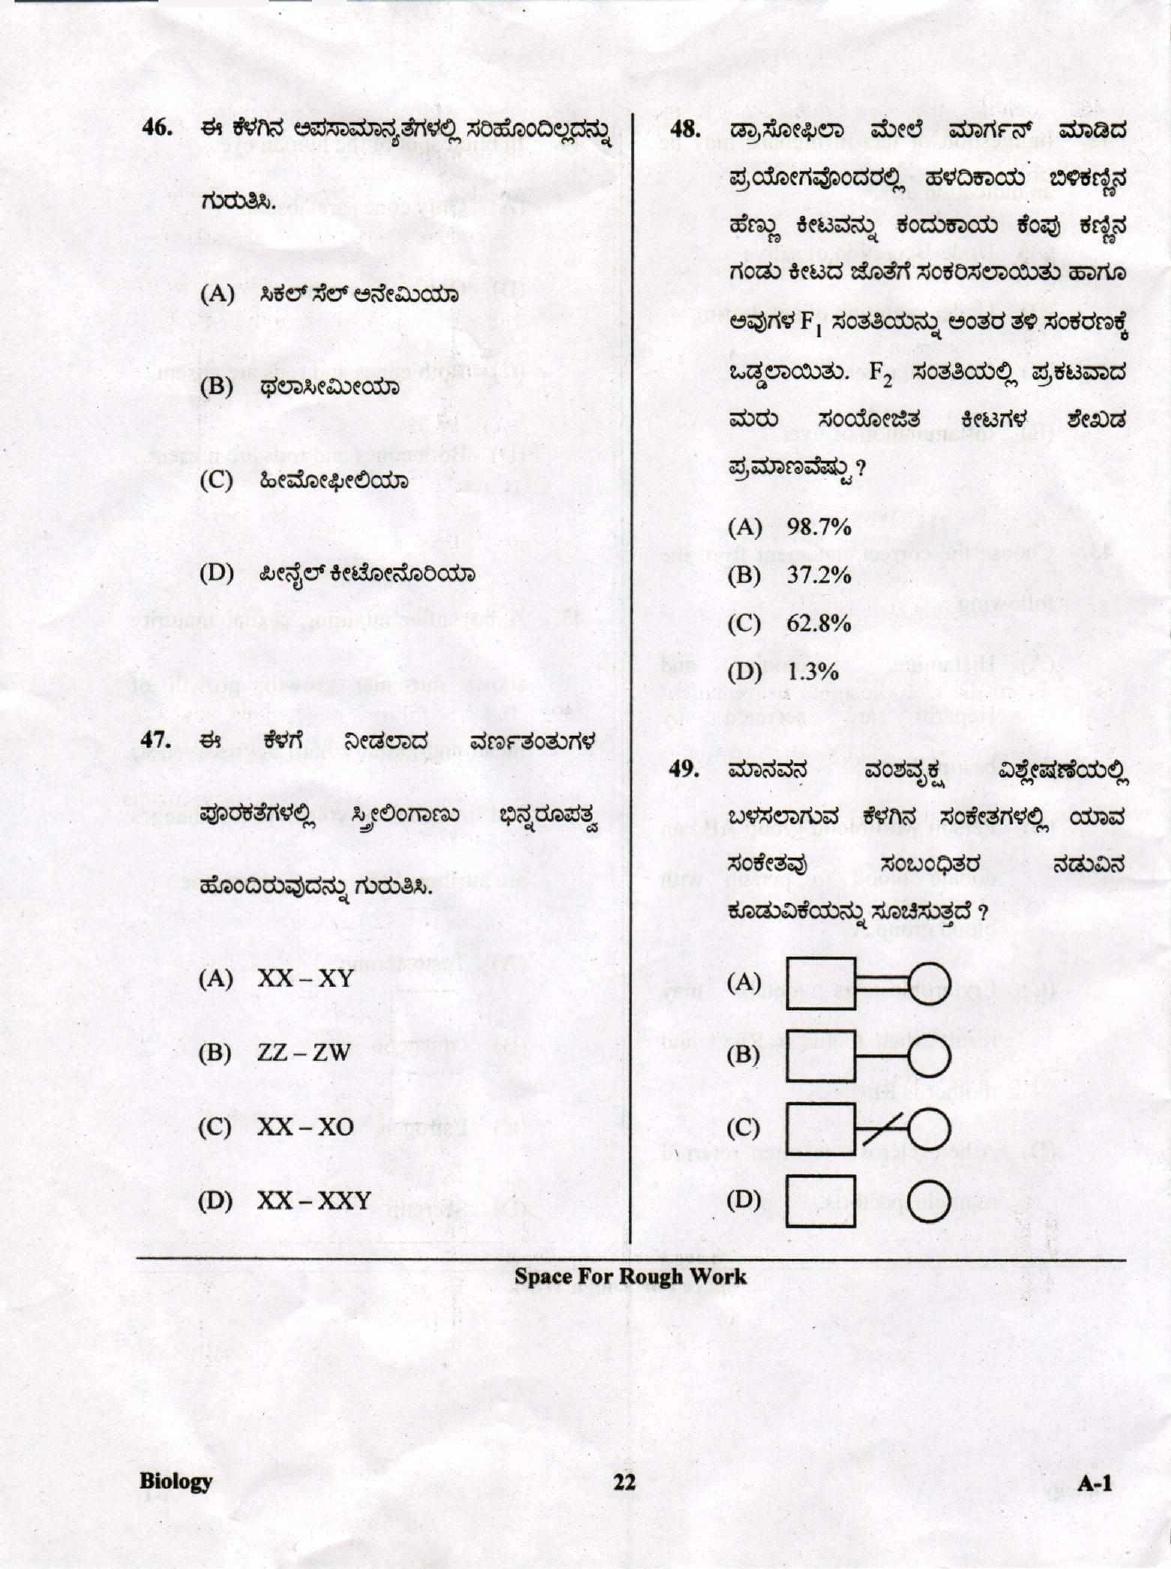 KCET Biology 2019 Question Papers - Page 22